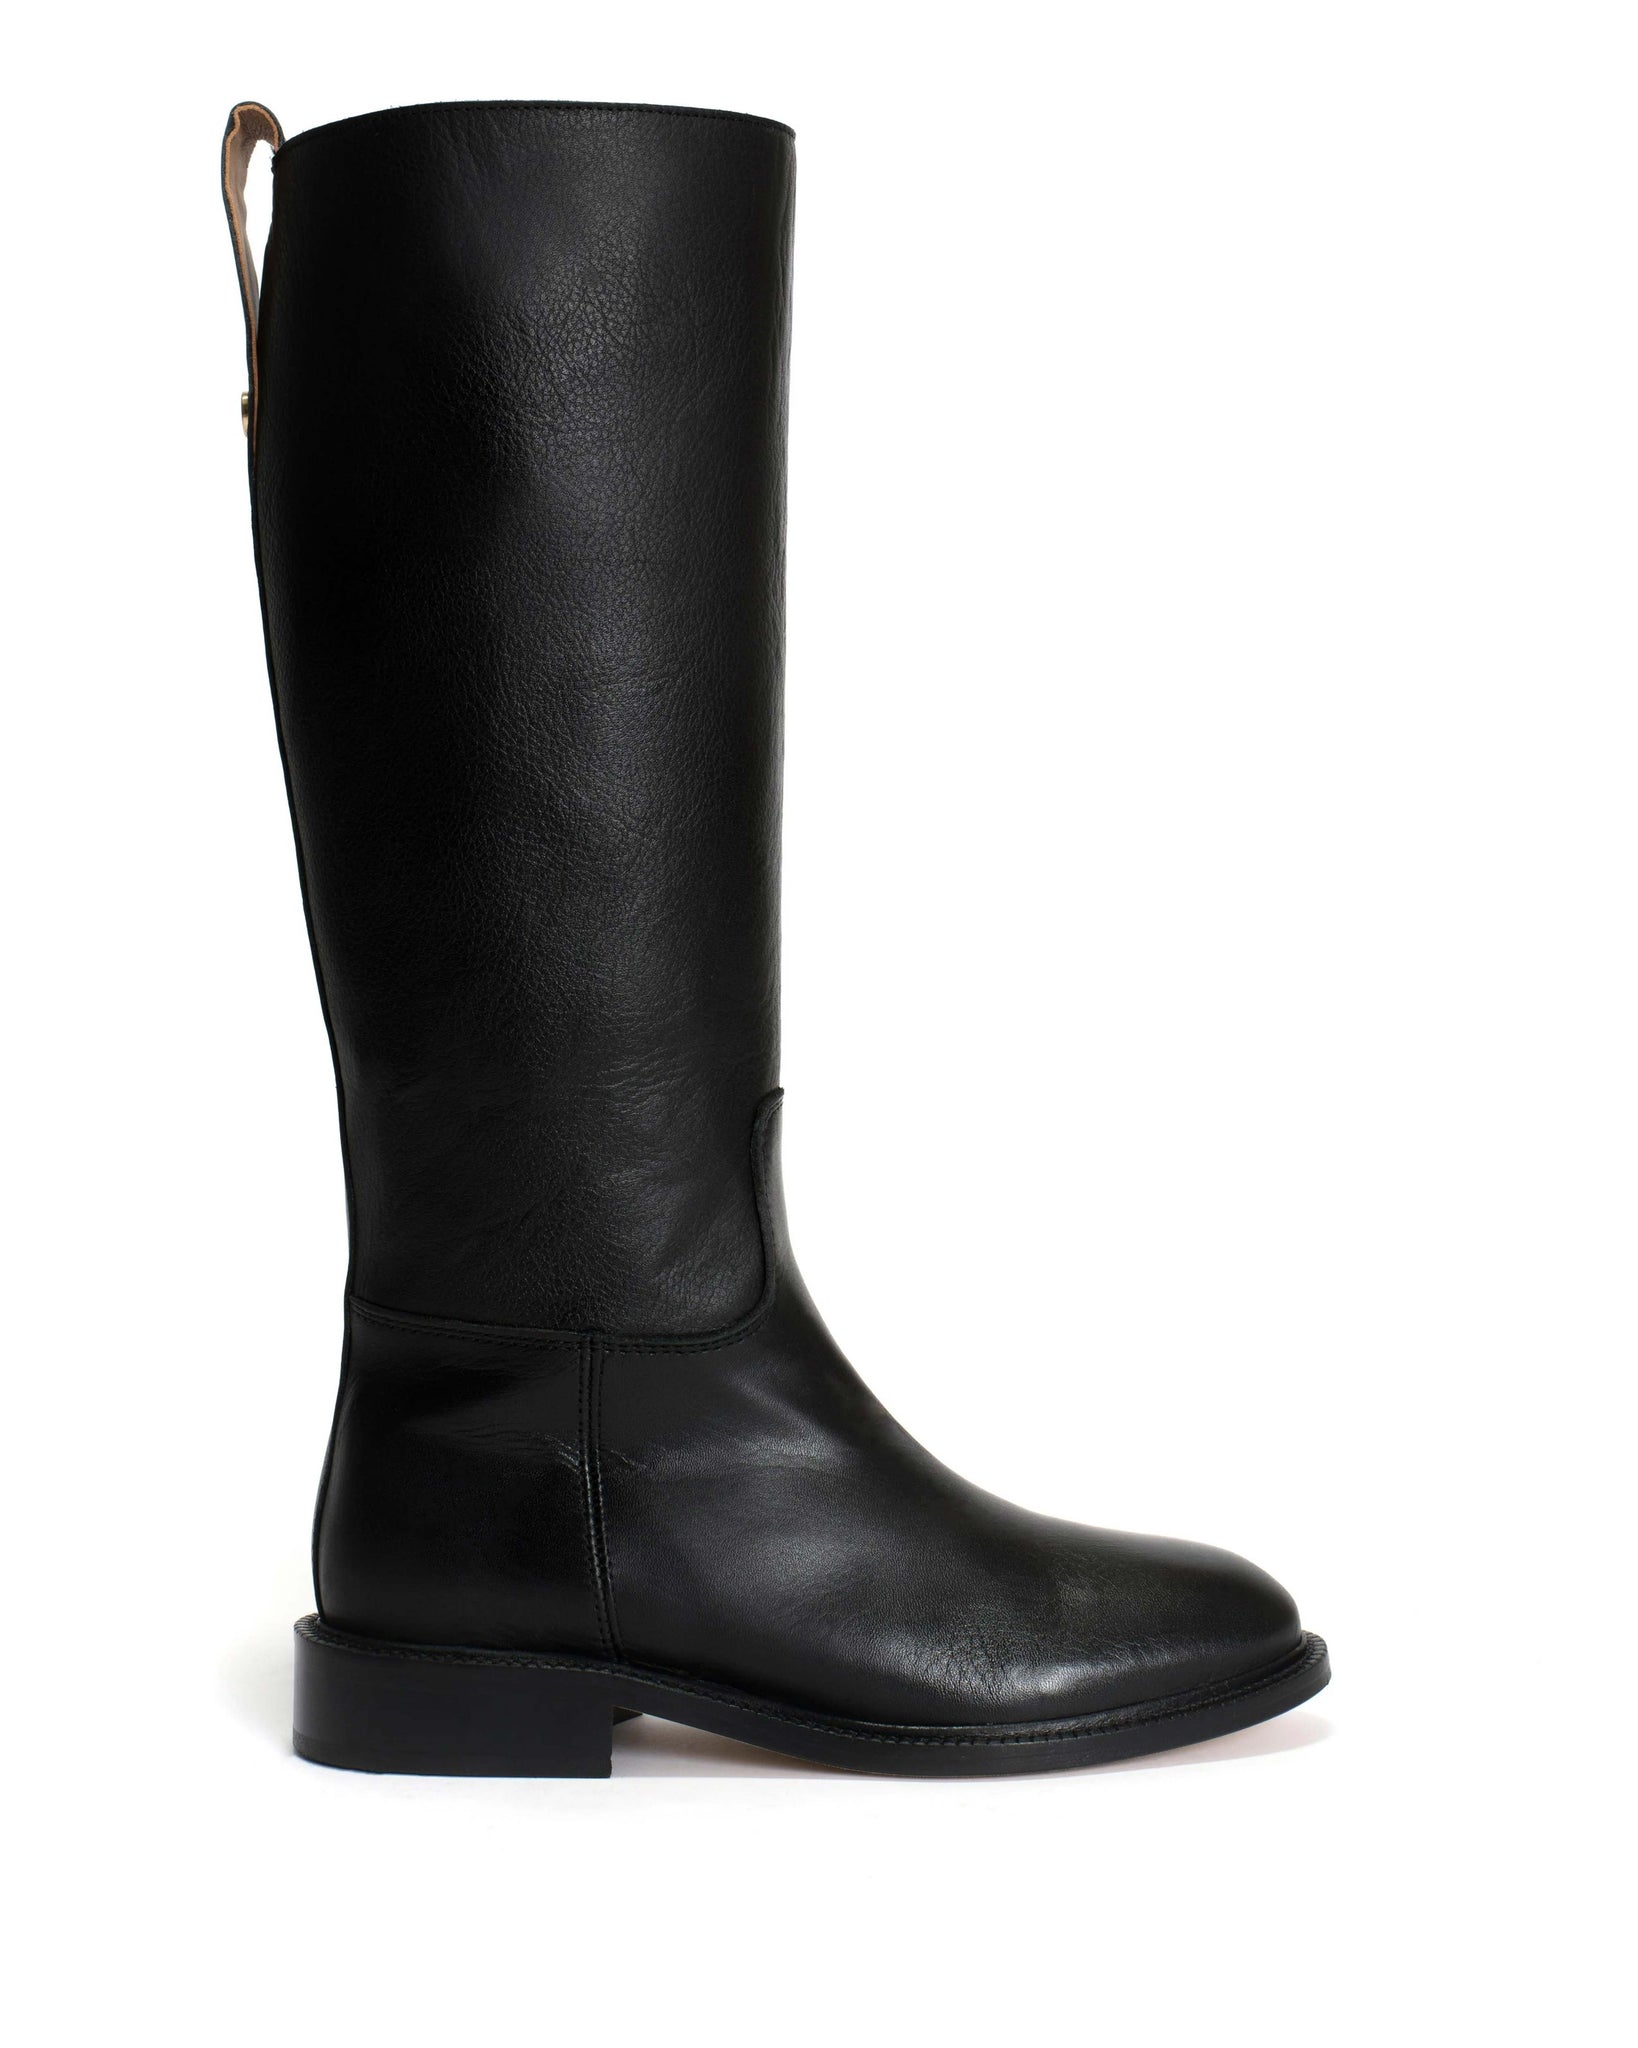 Semih Glossy grained vegetable tanned calf Black